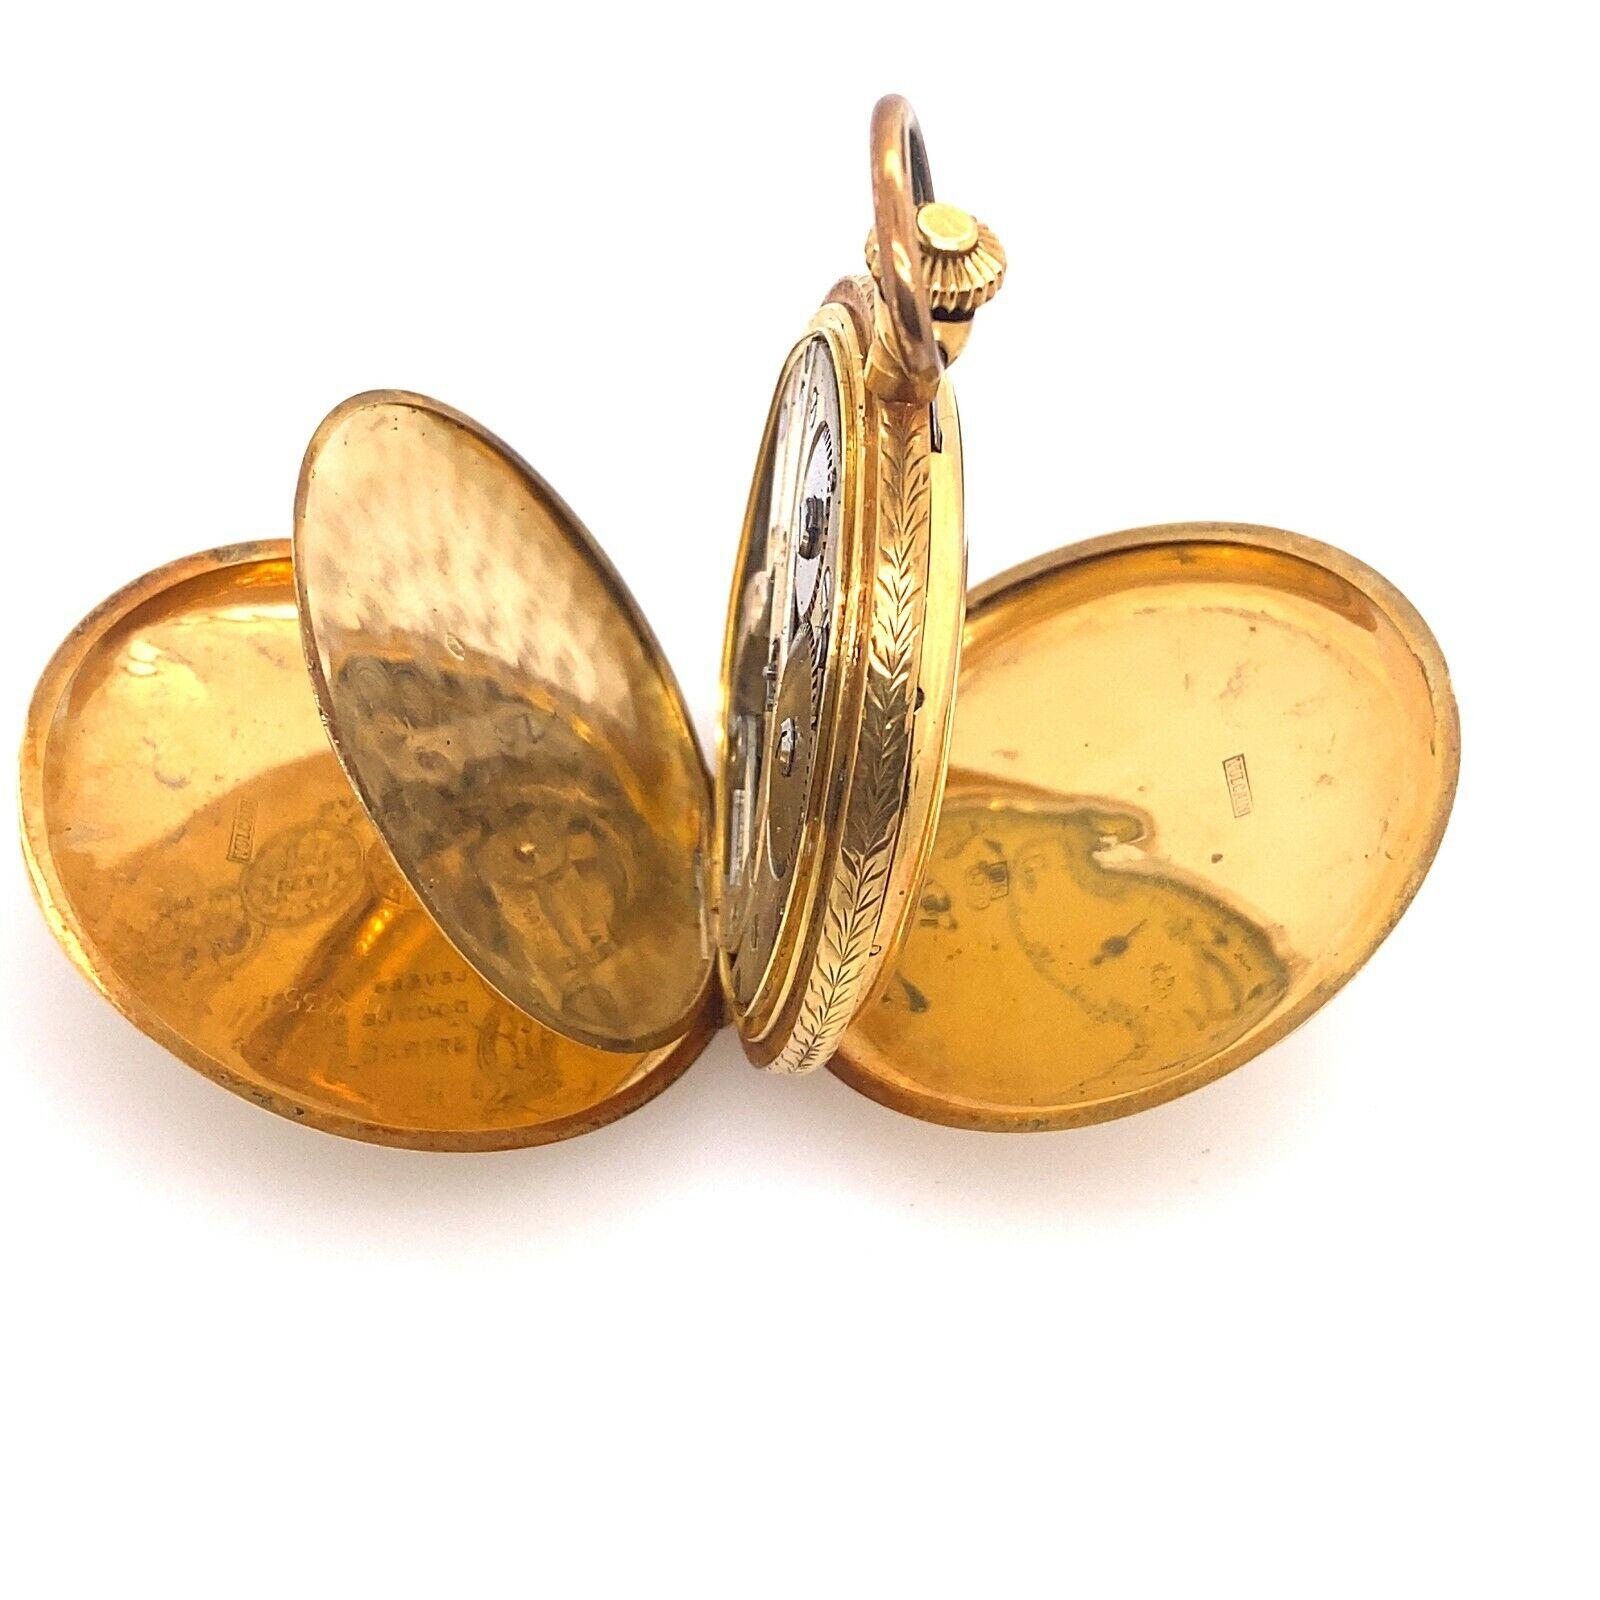 Original Vulcain Pocket Watch in 18ct Yellow Gold For Sale 2